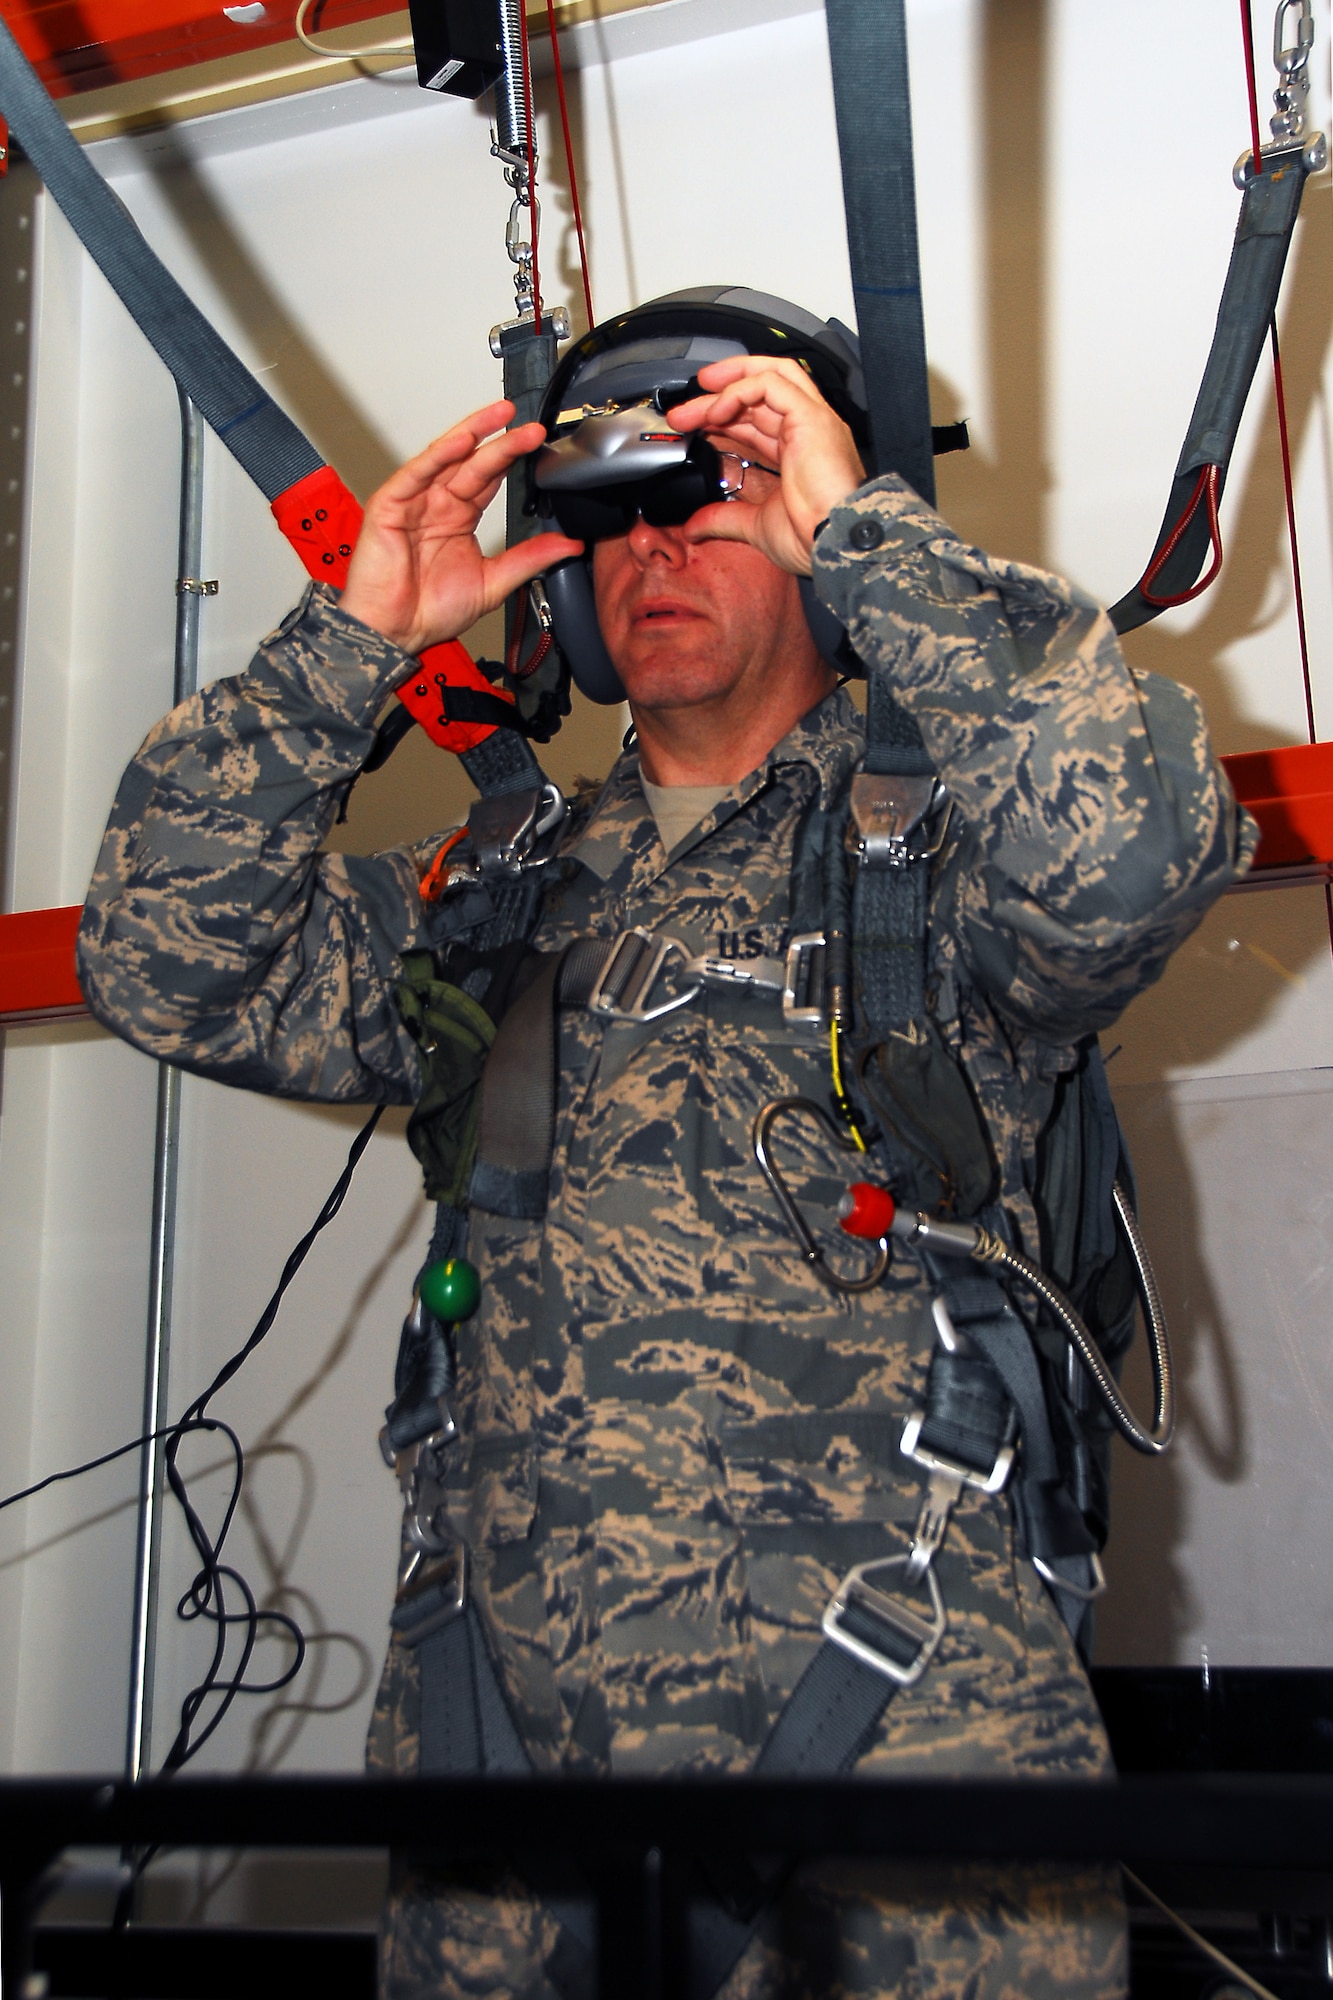 Chief Master Sergeant Steven Larwood, 22nd Air Force command cheif, straps in a parachute simulator and jumps to his virtual destination in the 403rd Aircrew Flight Equipment shop. As part of his job, he makes monthly visits to wings assigned to the 22nd AF to encourage Airmen and listen to their ideas and concerns. (U.S. Air Force Photo by Senior Airman Tabitha Dupas)